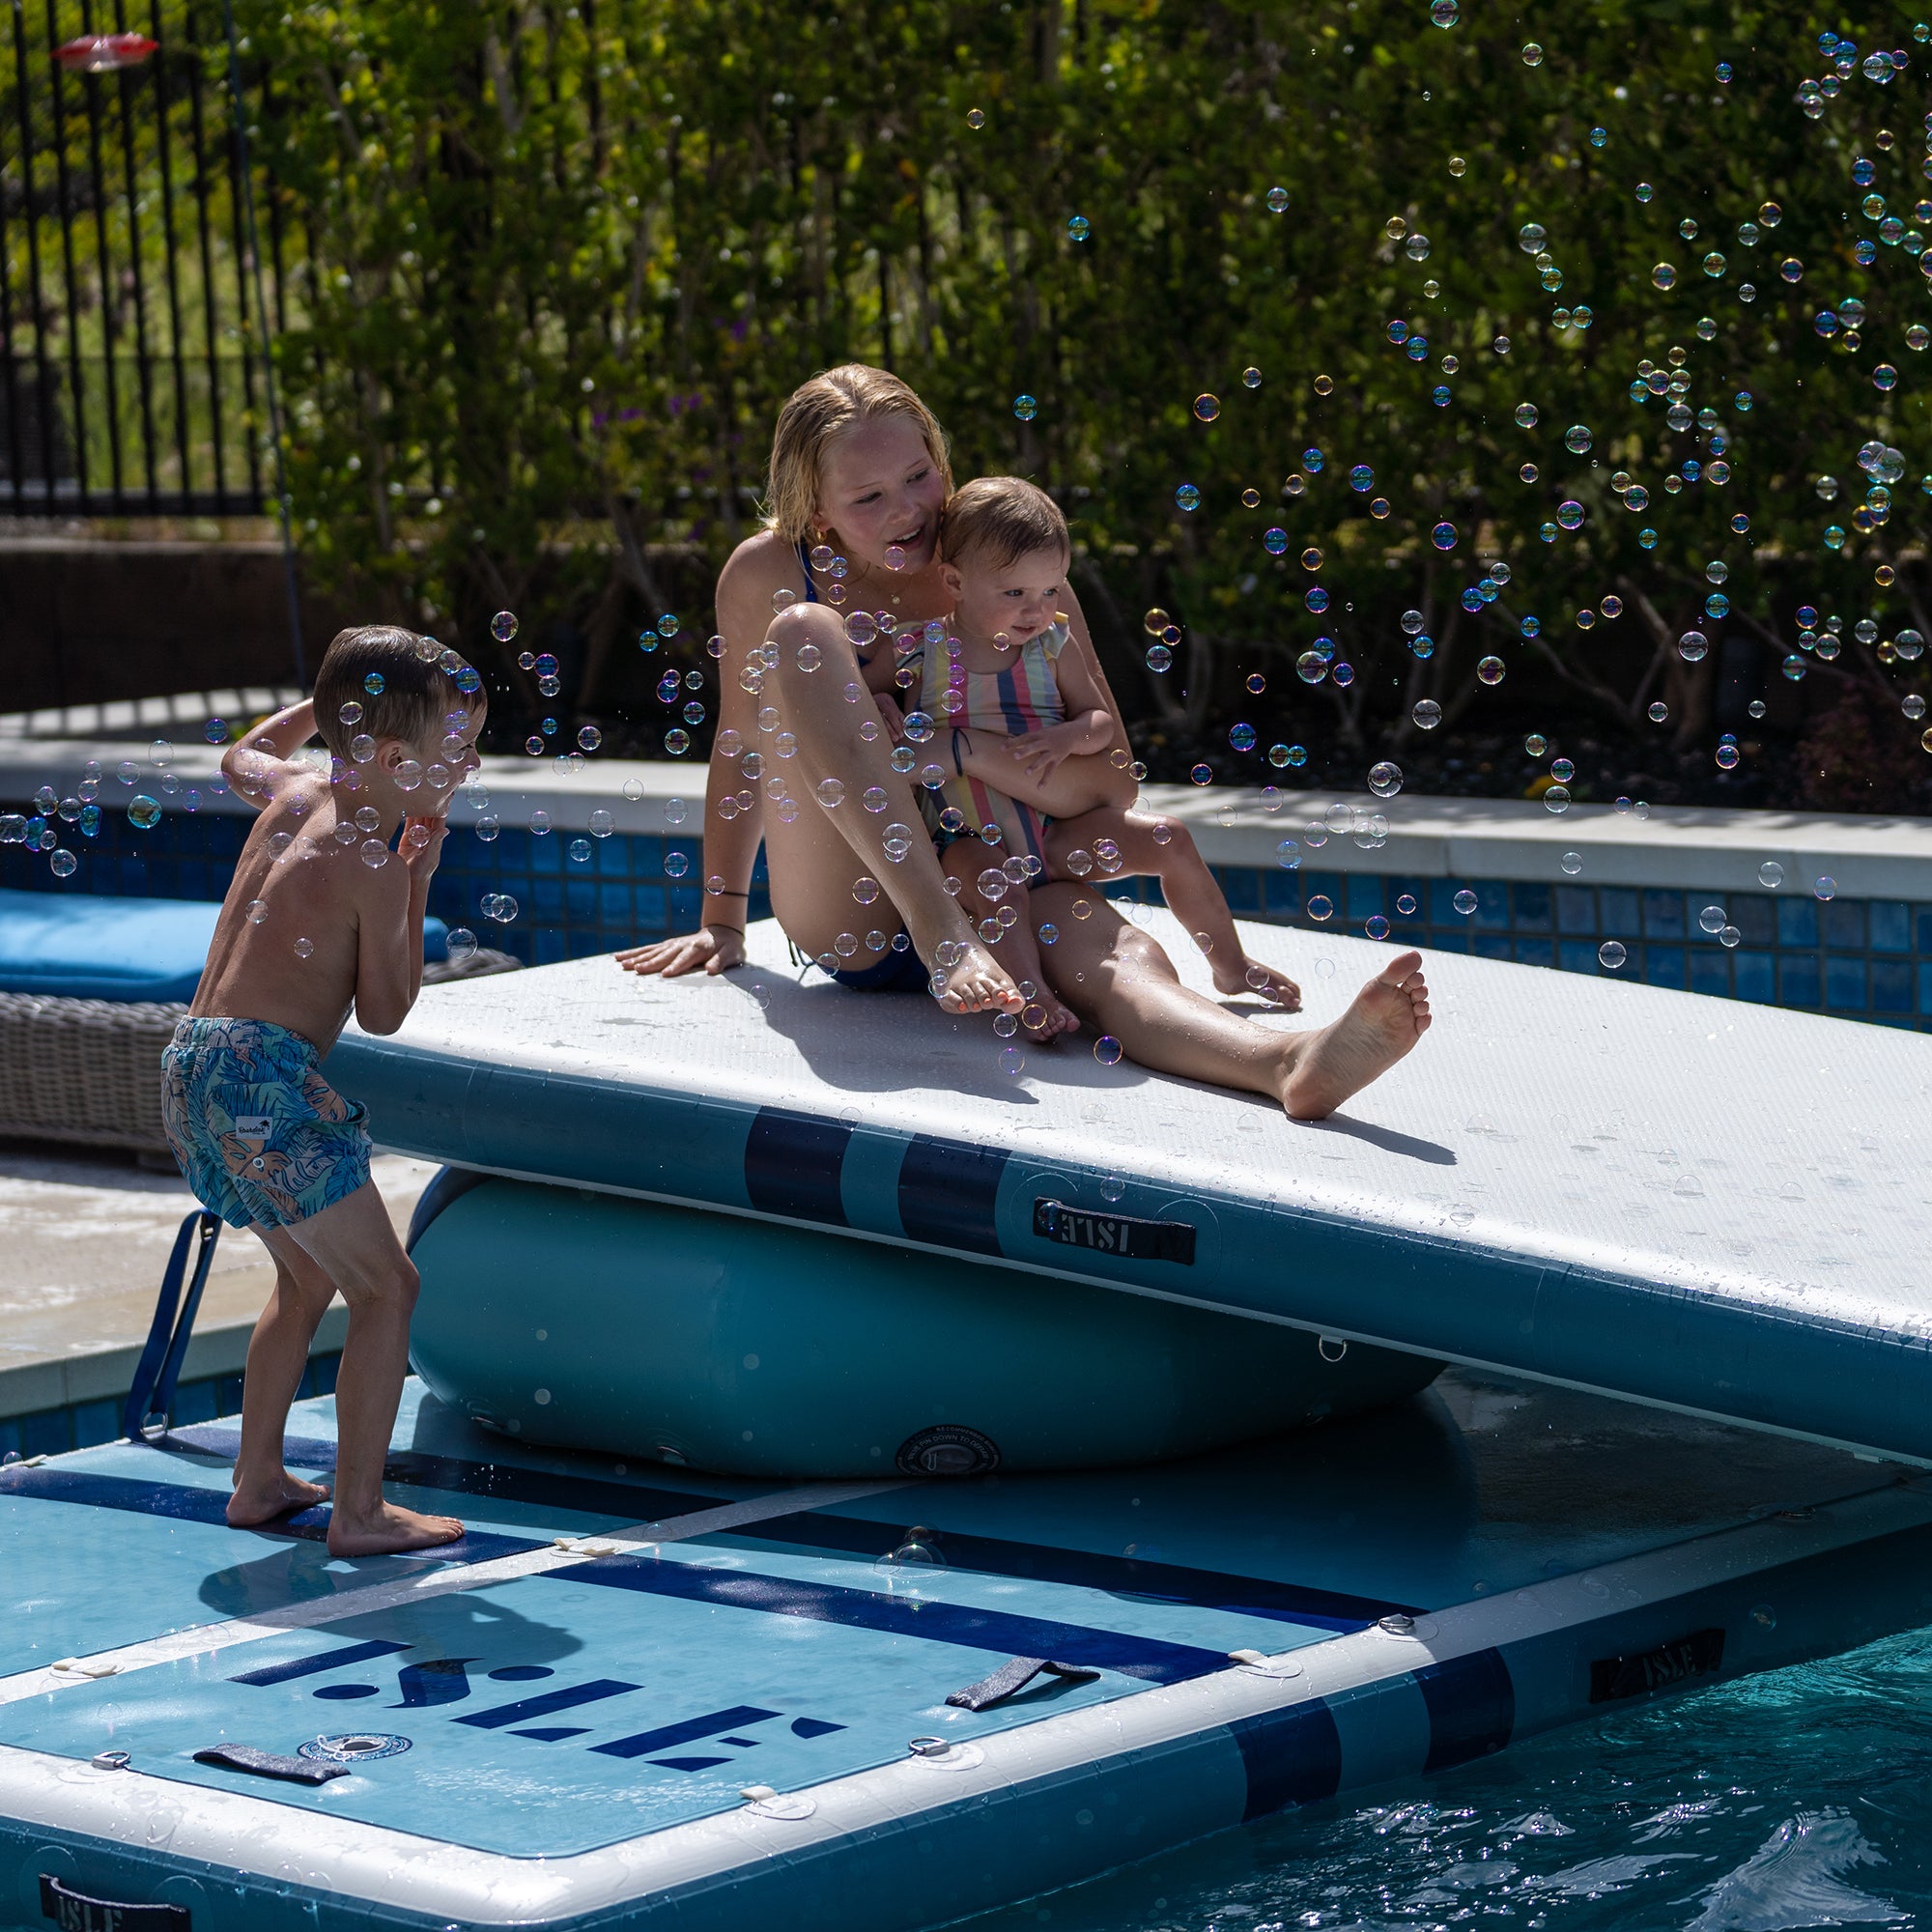 Kids Sliding On The Runway Dock & Air Track in a Pool